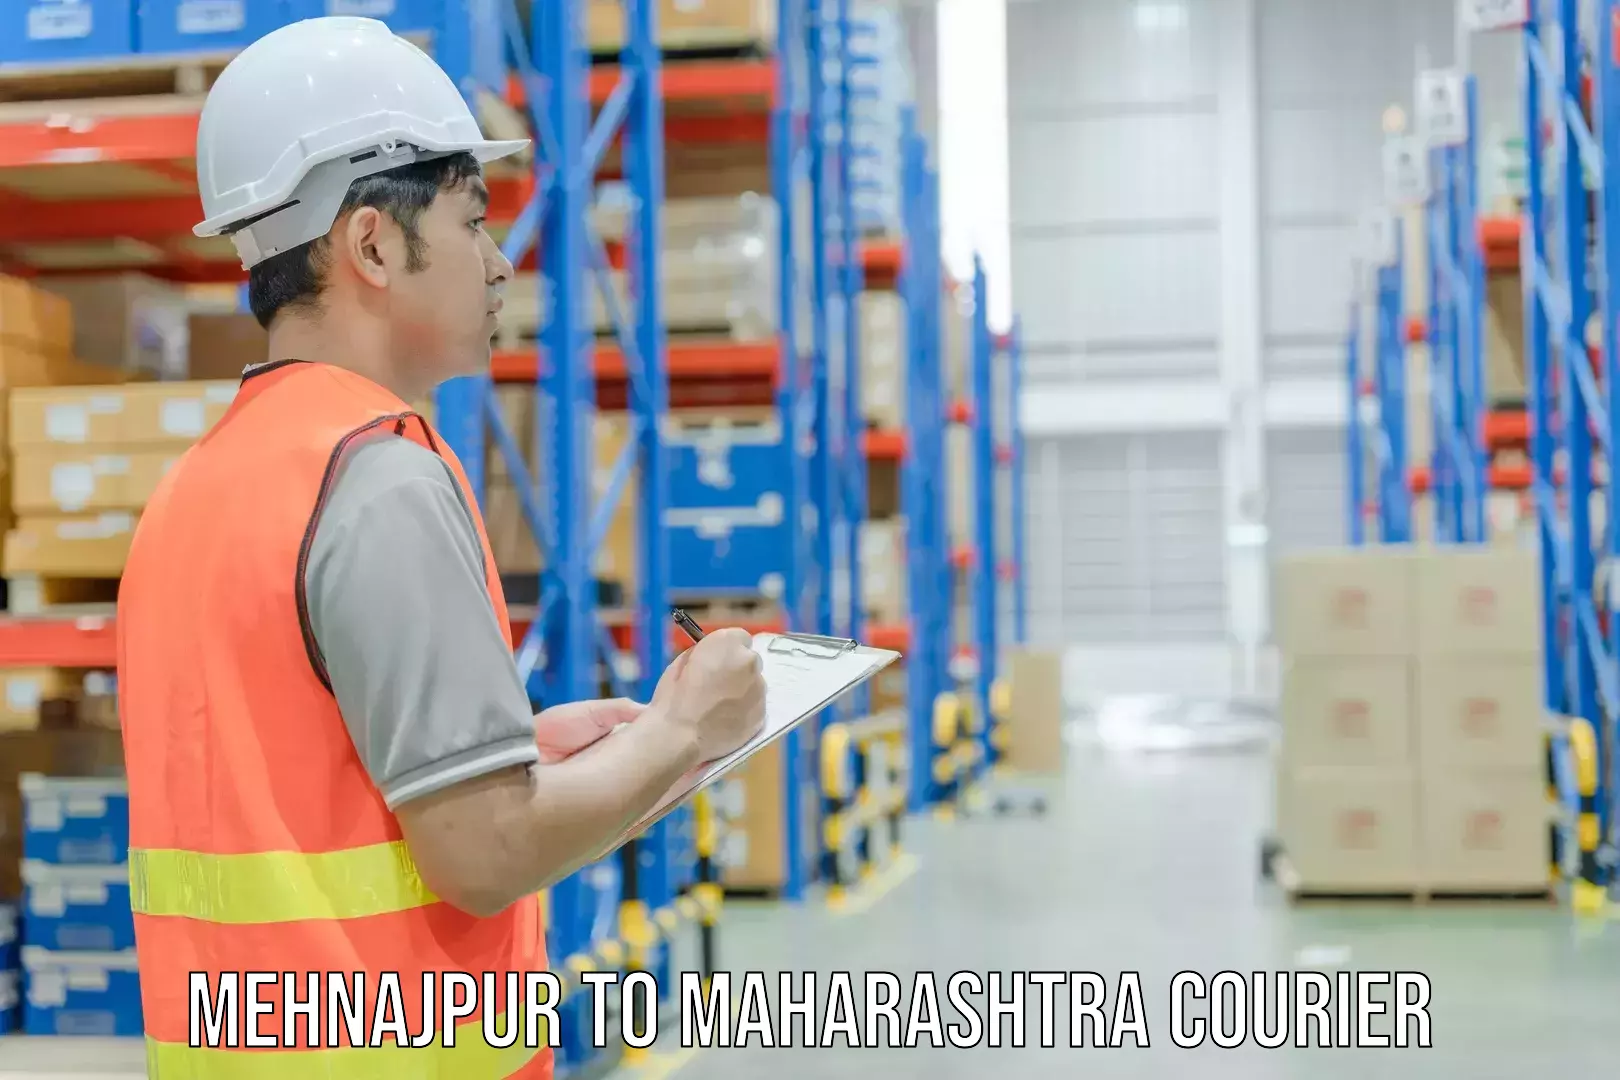 Nationwide shipping coverage Mehnajpur to Junnar